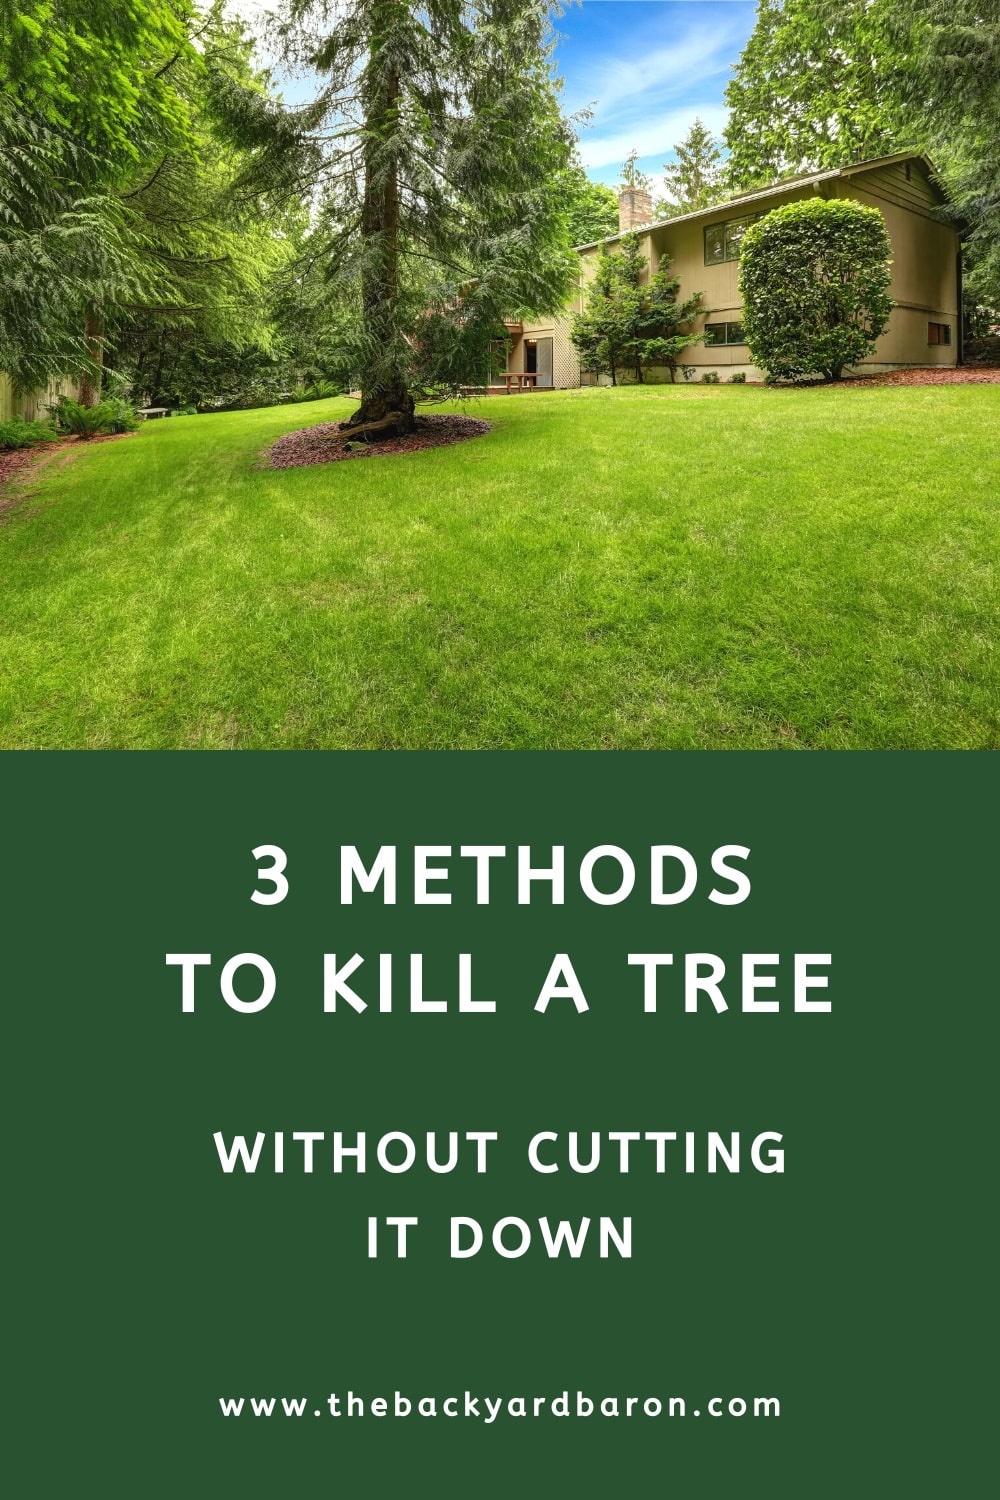 Three methods to kill a tree without cutting